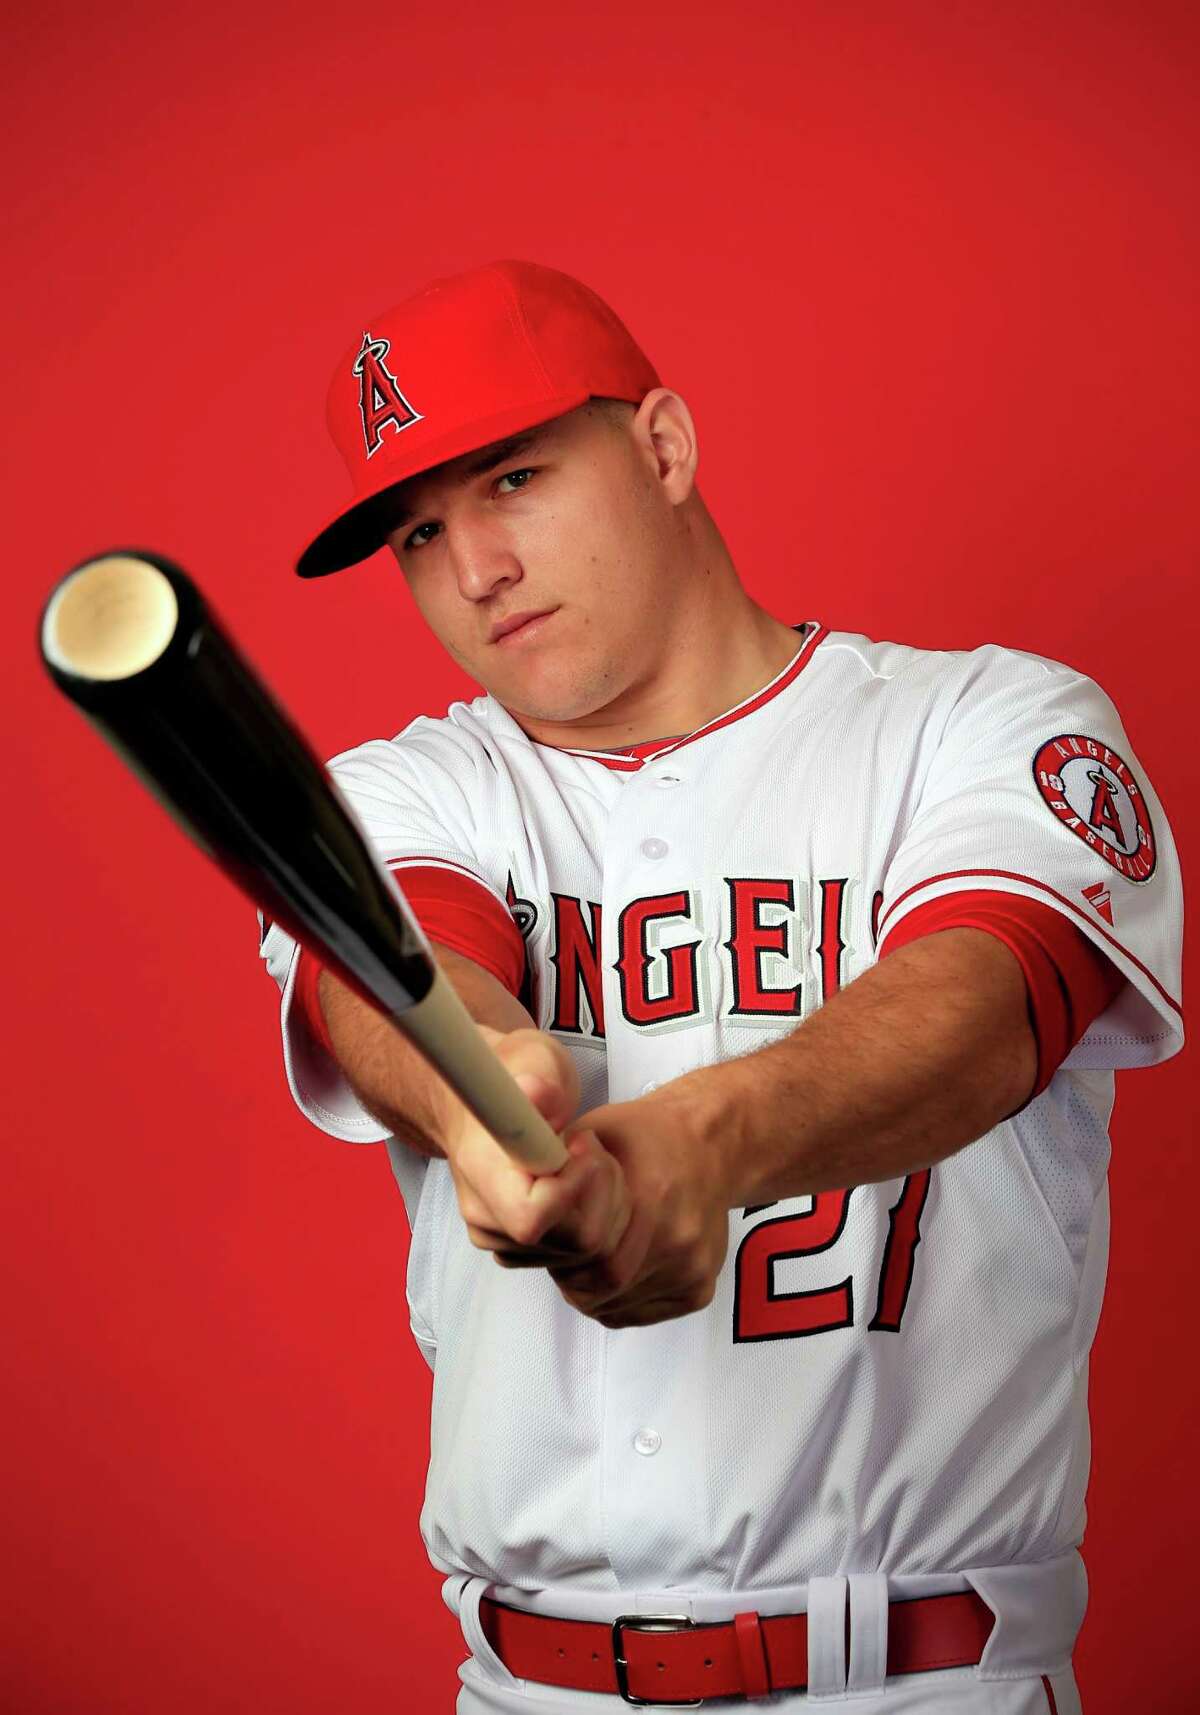 TEMPE, AZ - FEBRUARY 28: Mike Trout #27 poses during Los Angeles Angels of Anaheim Photo Day on February 28, 2015 in Tempe, Arizona. (Photo by Jamie Squire/Getty Images)